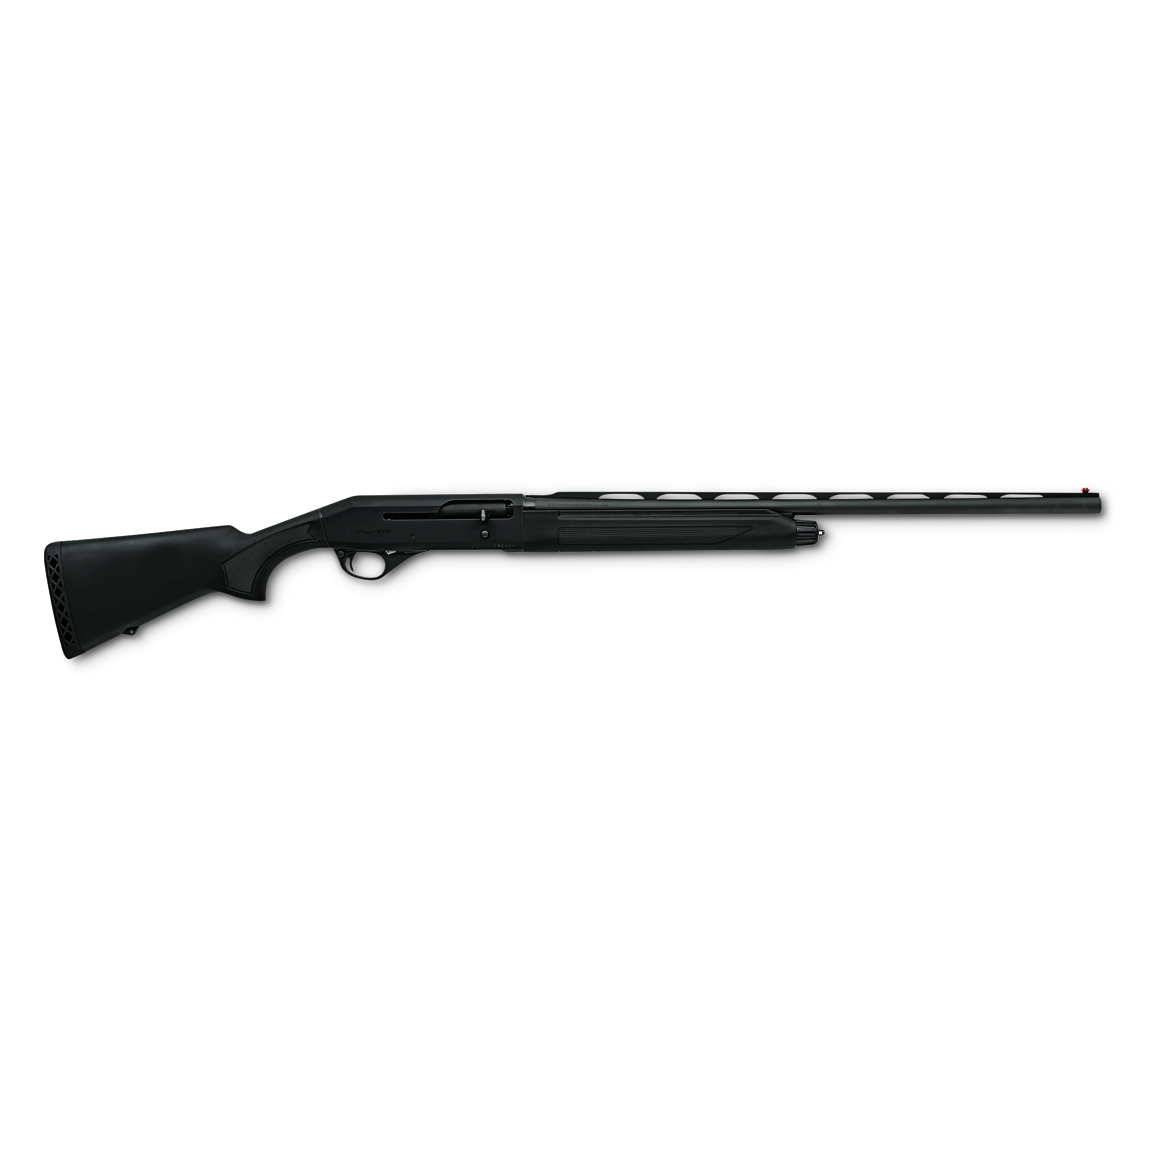 Stoeger M3020 Compact, Semi-automatic, 20 Gauge, 26" Barrel, Synthetic Stock, 4+1 Rounds